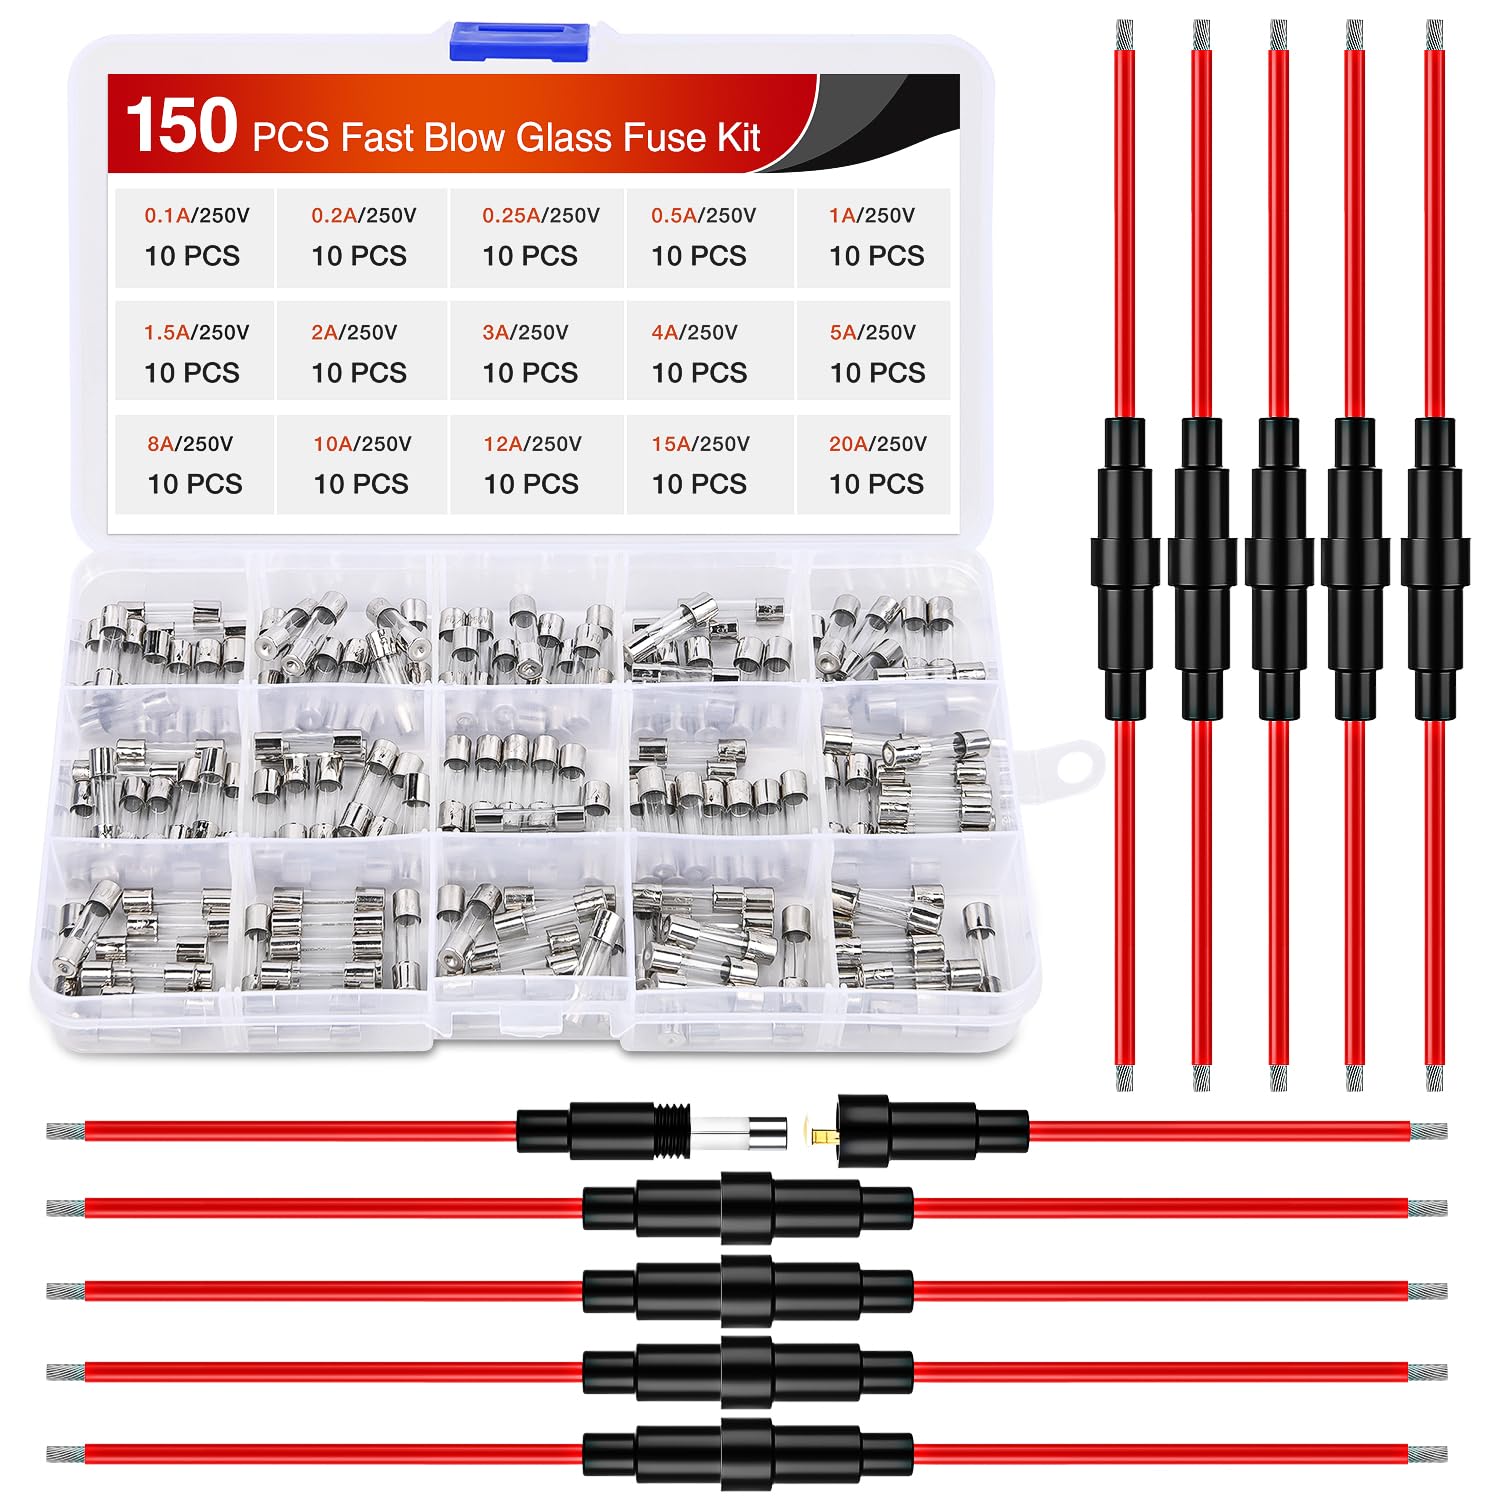 Nilight 150PCS Fast Blow Glass Fuses with 10PCS 5x20mm Inline Fuse Holder Screw Type16AWG 250V 0.1A 0.2A 0.25A 0.5A 1A 1.5A 2A 3A 4A 5A 8A 10A 12A 15A 20A Glass Tube Fuses Assortment, 2 Years Warranty